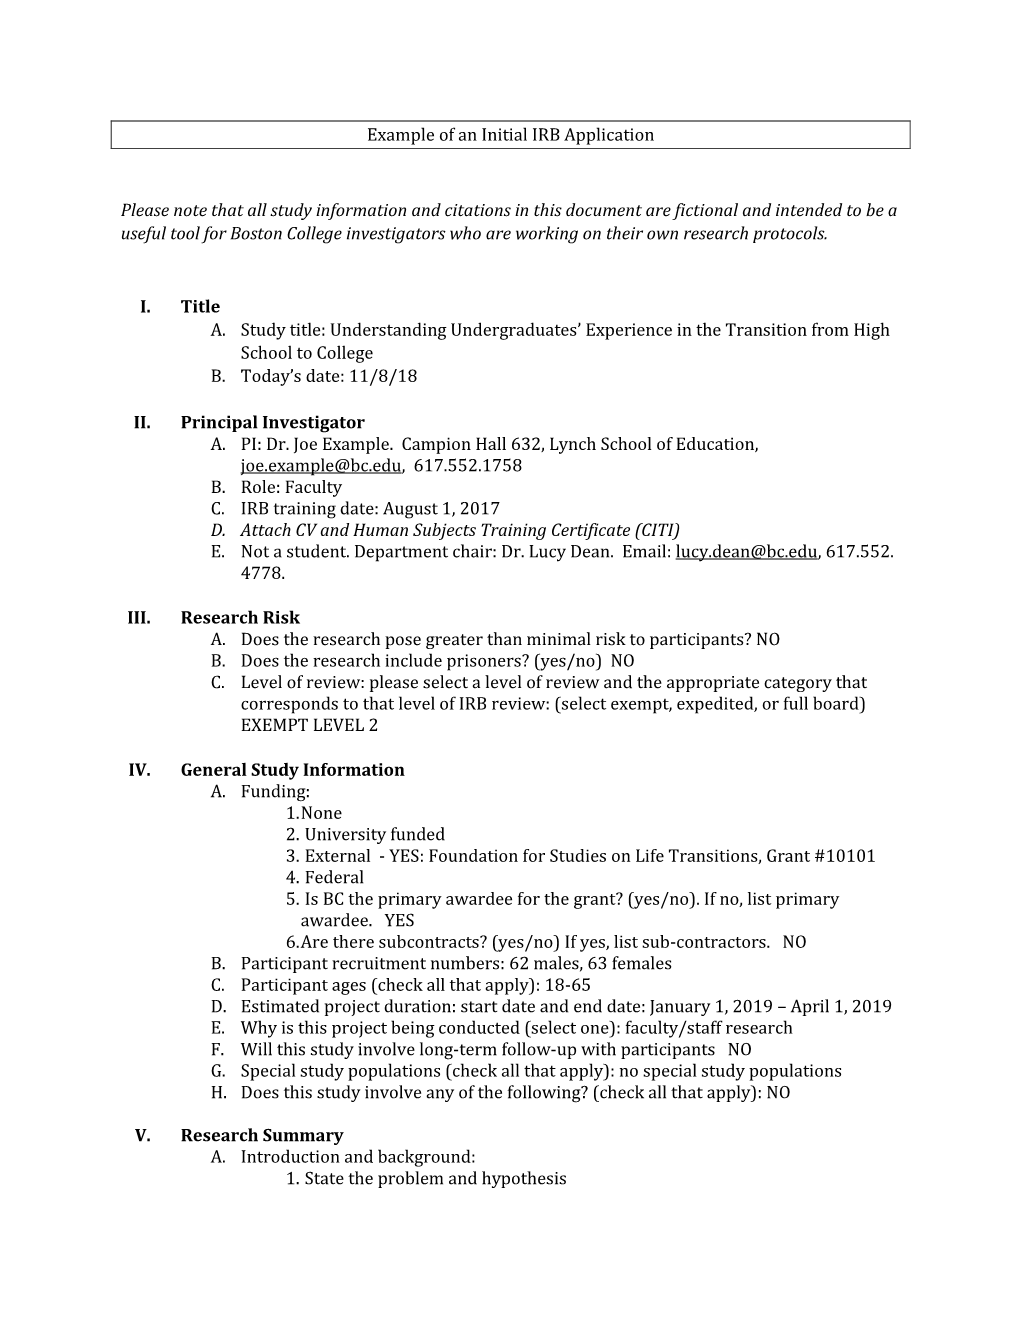 Example of an Initial IRB Application Please Note That All Study Information and Citations in This Document Are Fictional and In